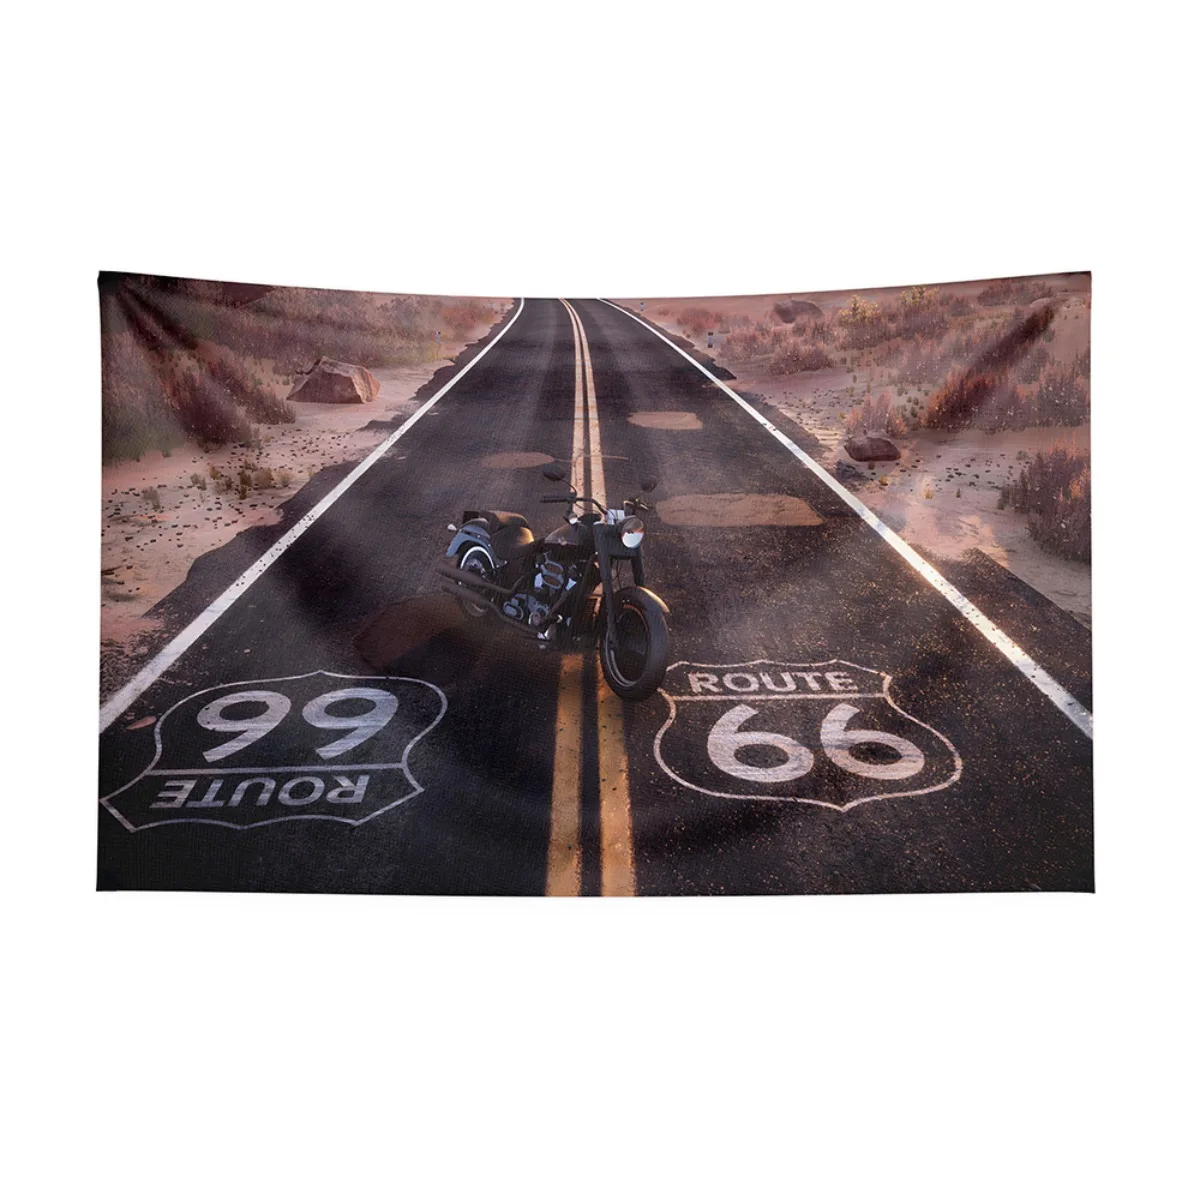 

Route 66 Tapestry Polyester Printed for Wall Hanging Dorm Backdrop Poster Home Decor for Bedroom Living Room 150x200cm 59x79in